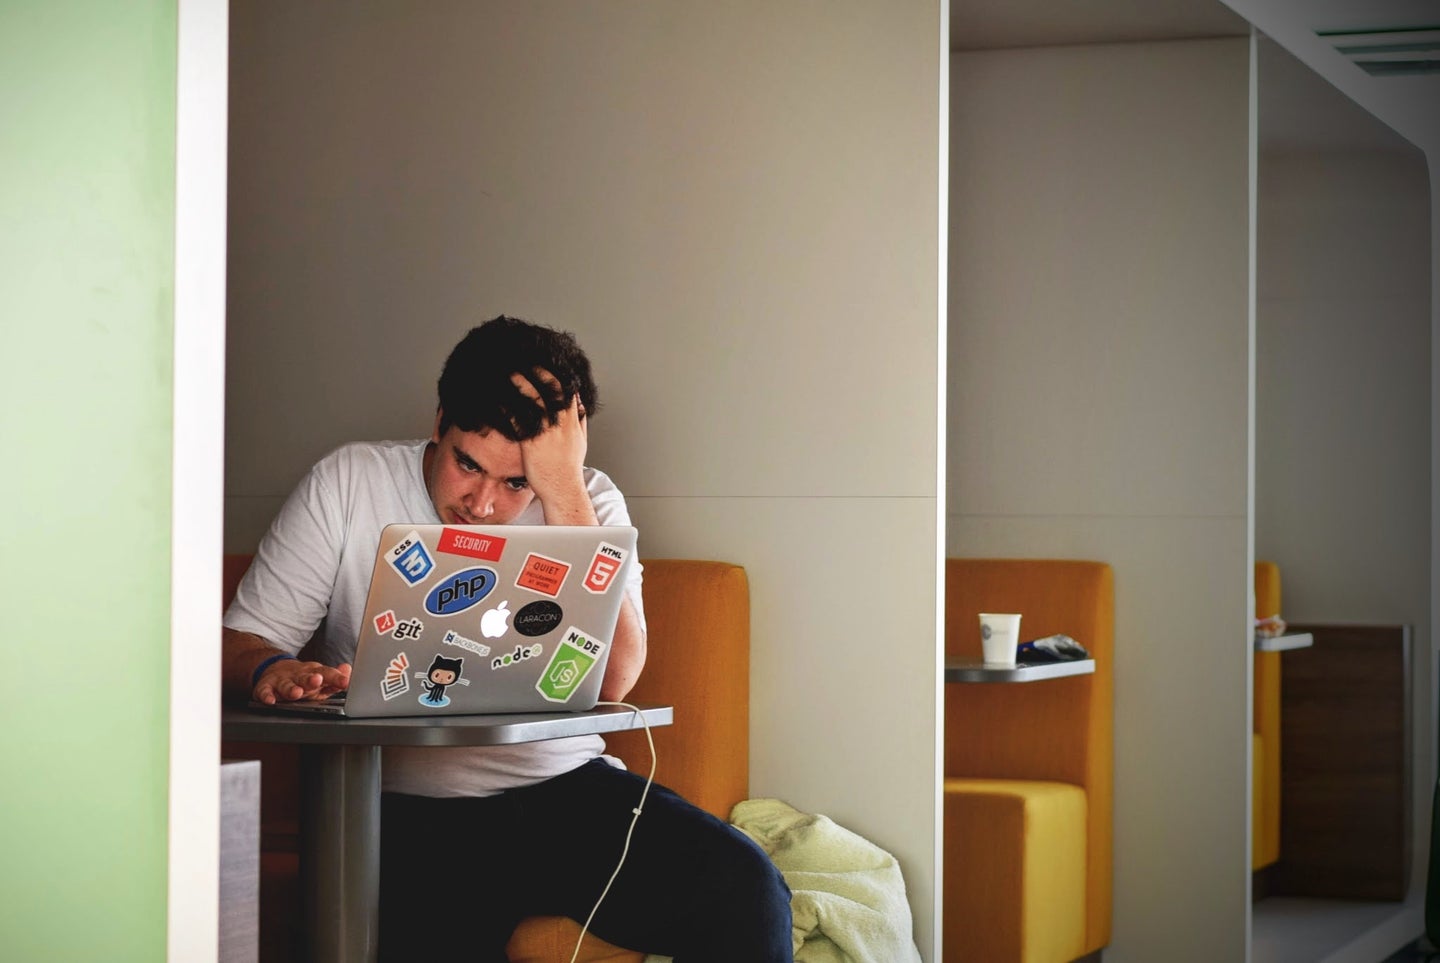 A man sitting in a study cubicle, holding his head in frustration as he looks at his laptop, which has a lot of stickers on it.